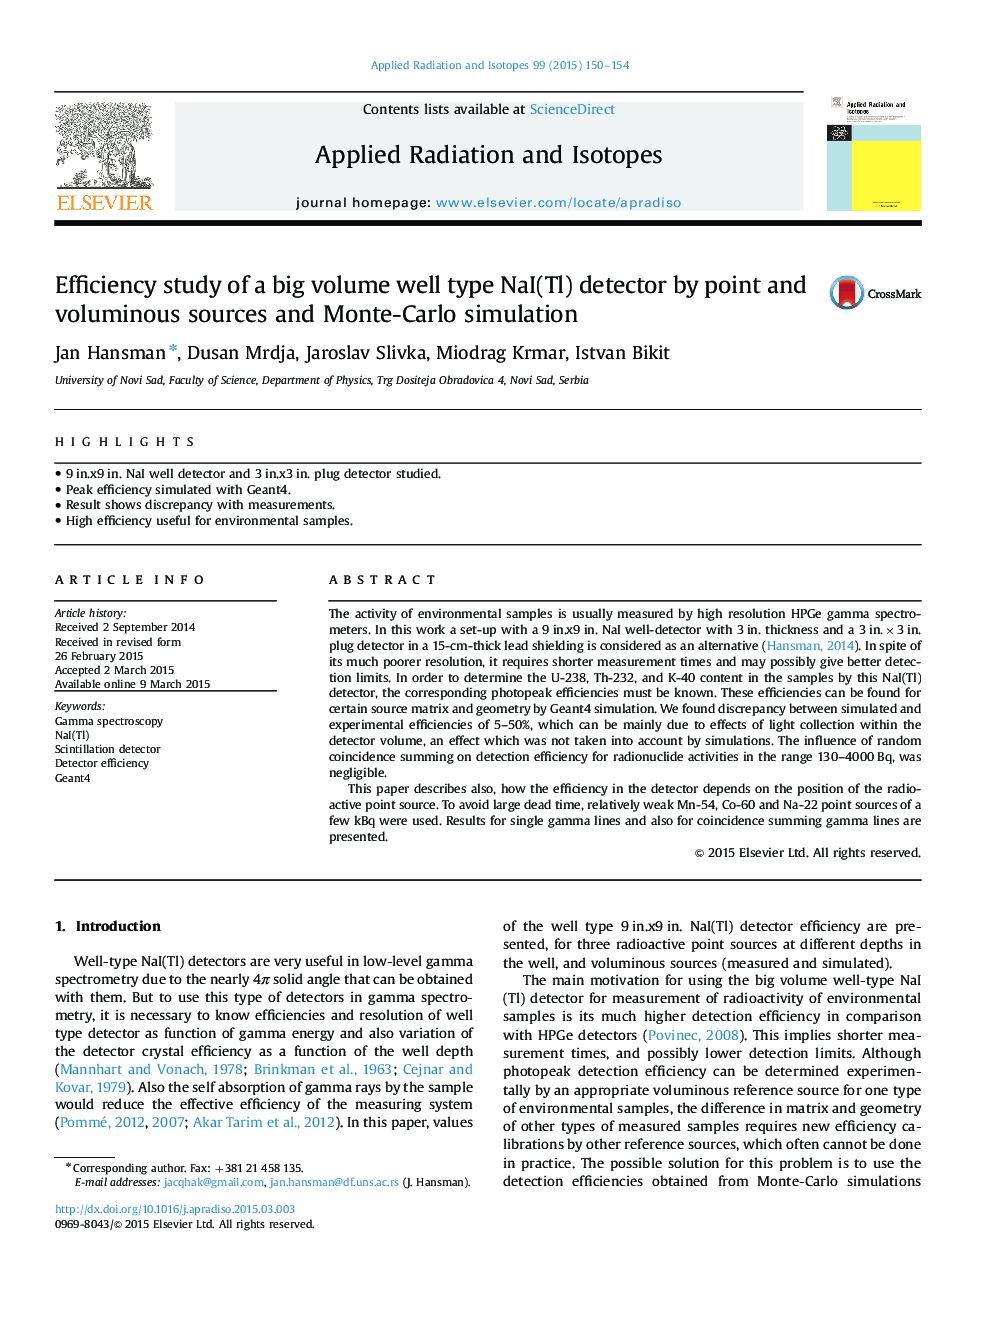 Efficiency study of a big volume well type NaI(Tl) detector by point and voluminous sources and Monte-Carlo simulation